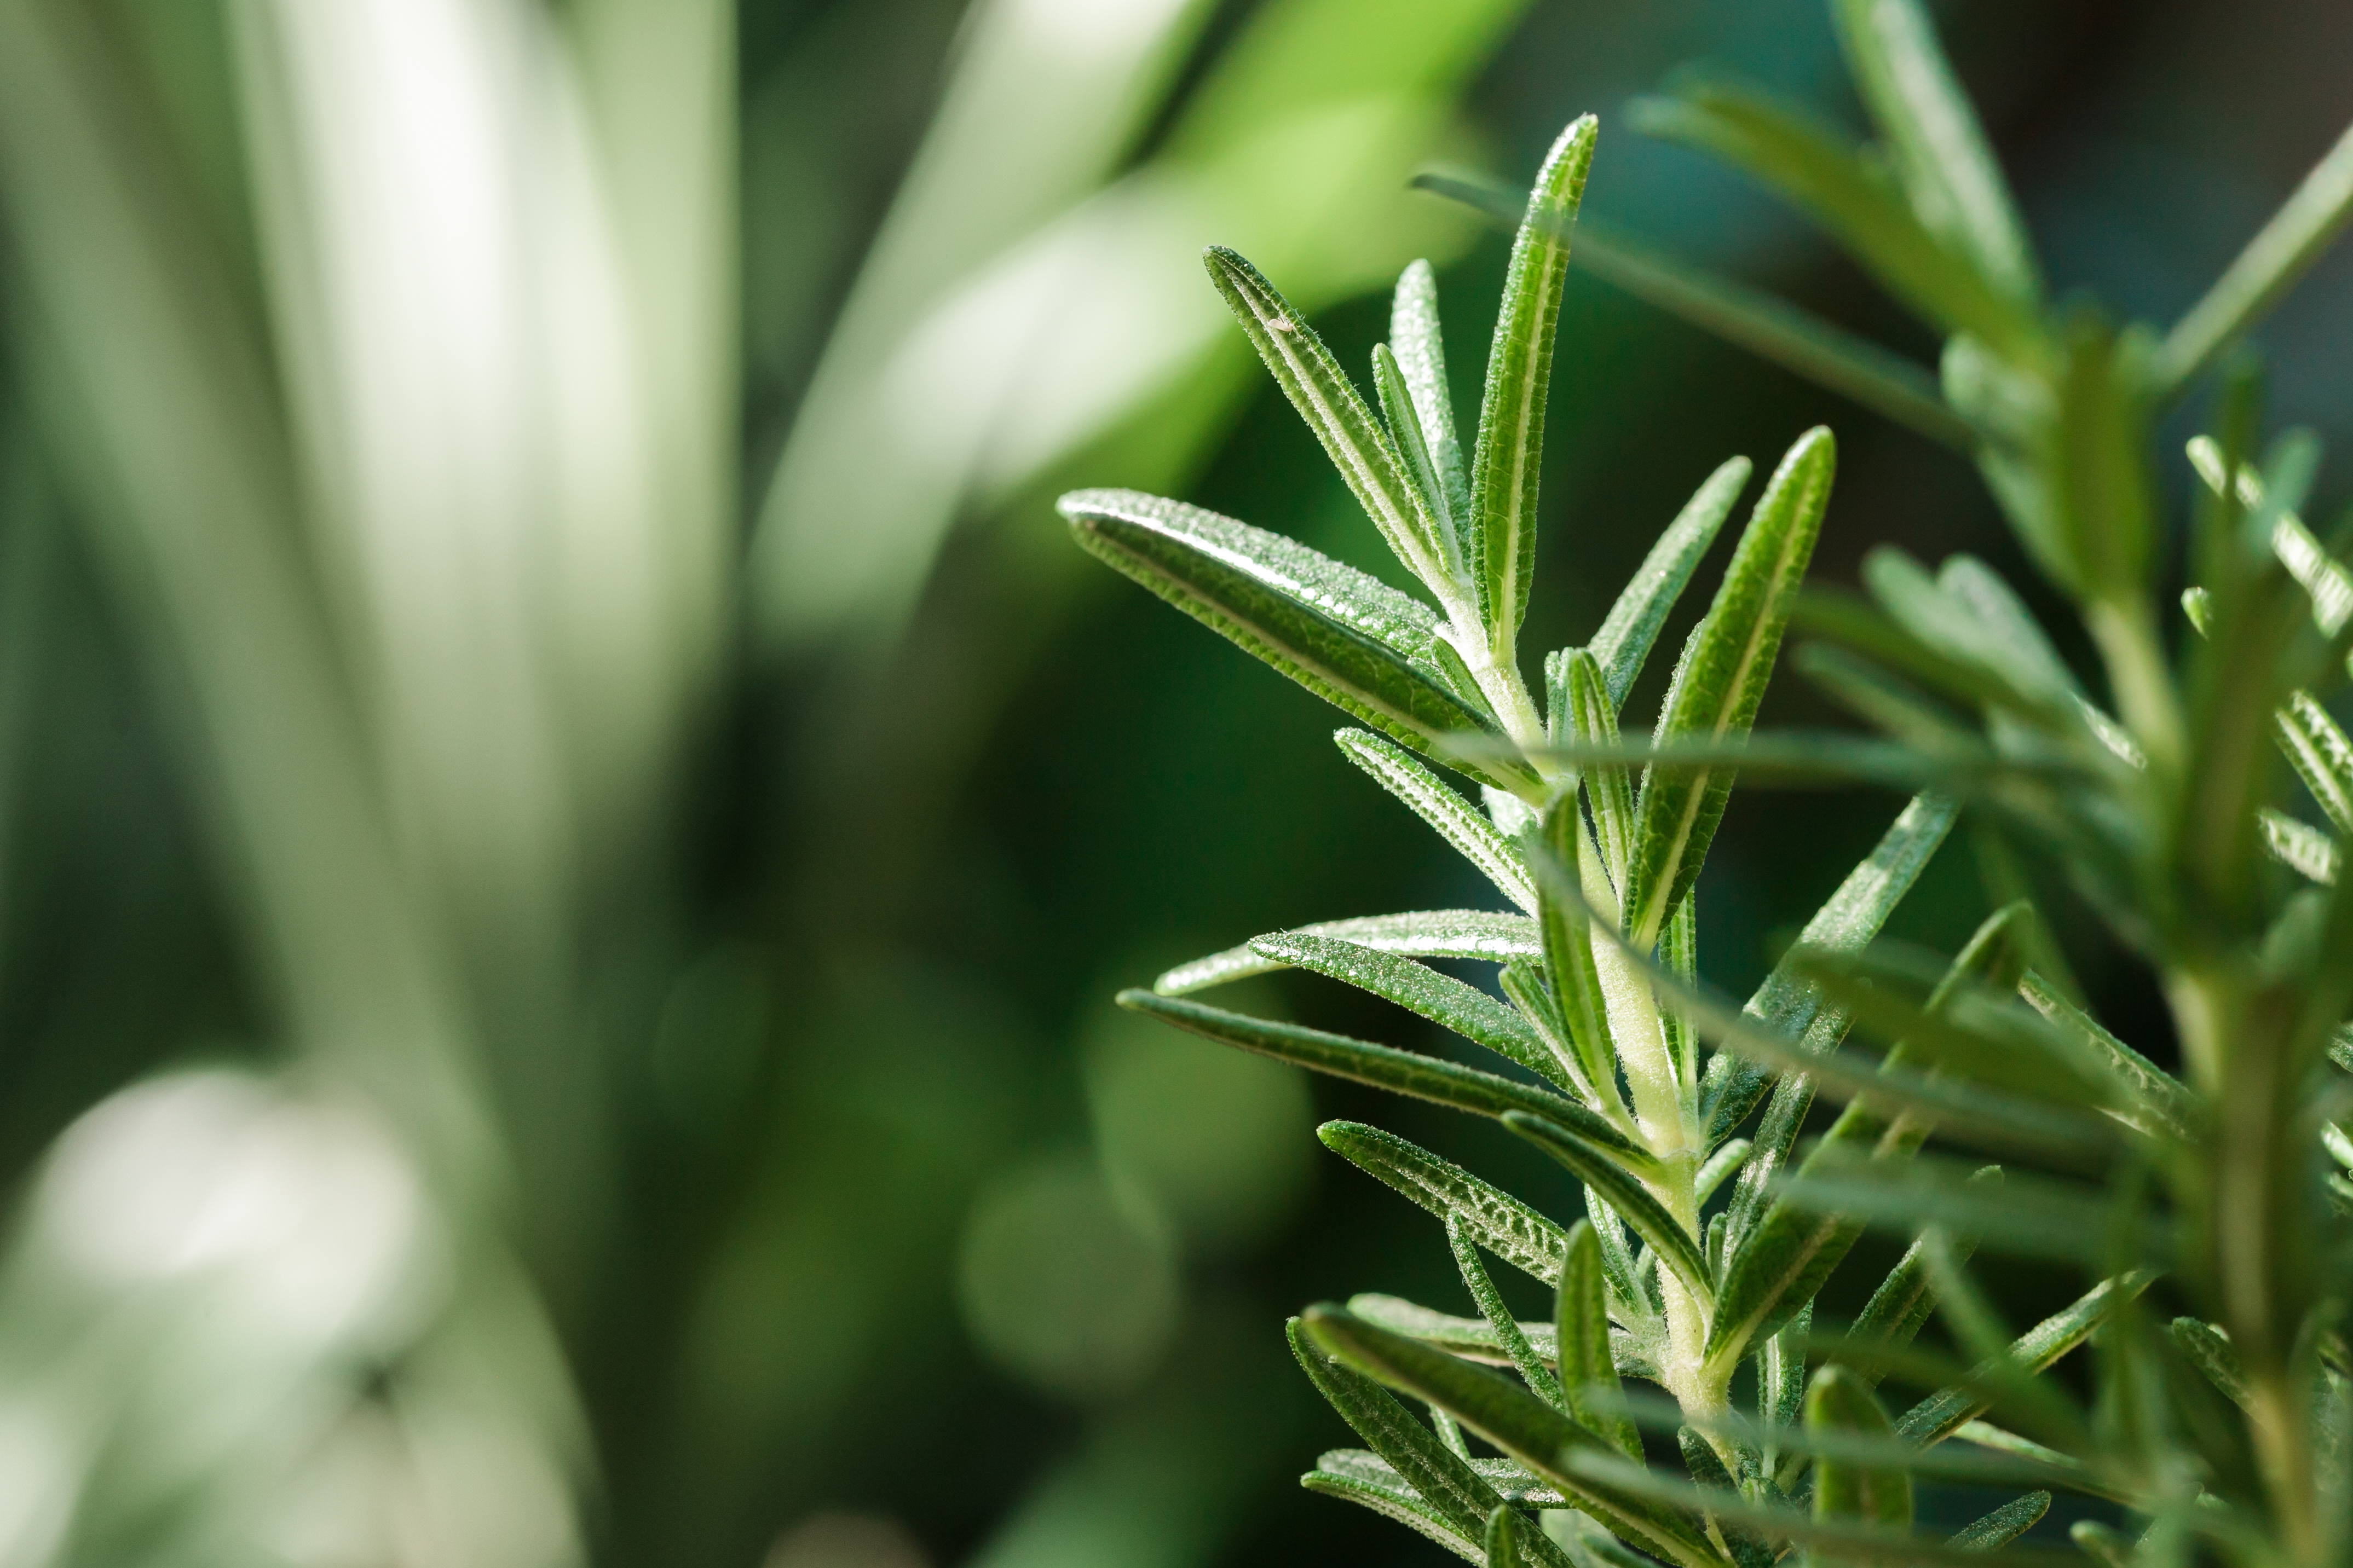 Rosemary for concentration